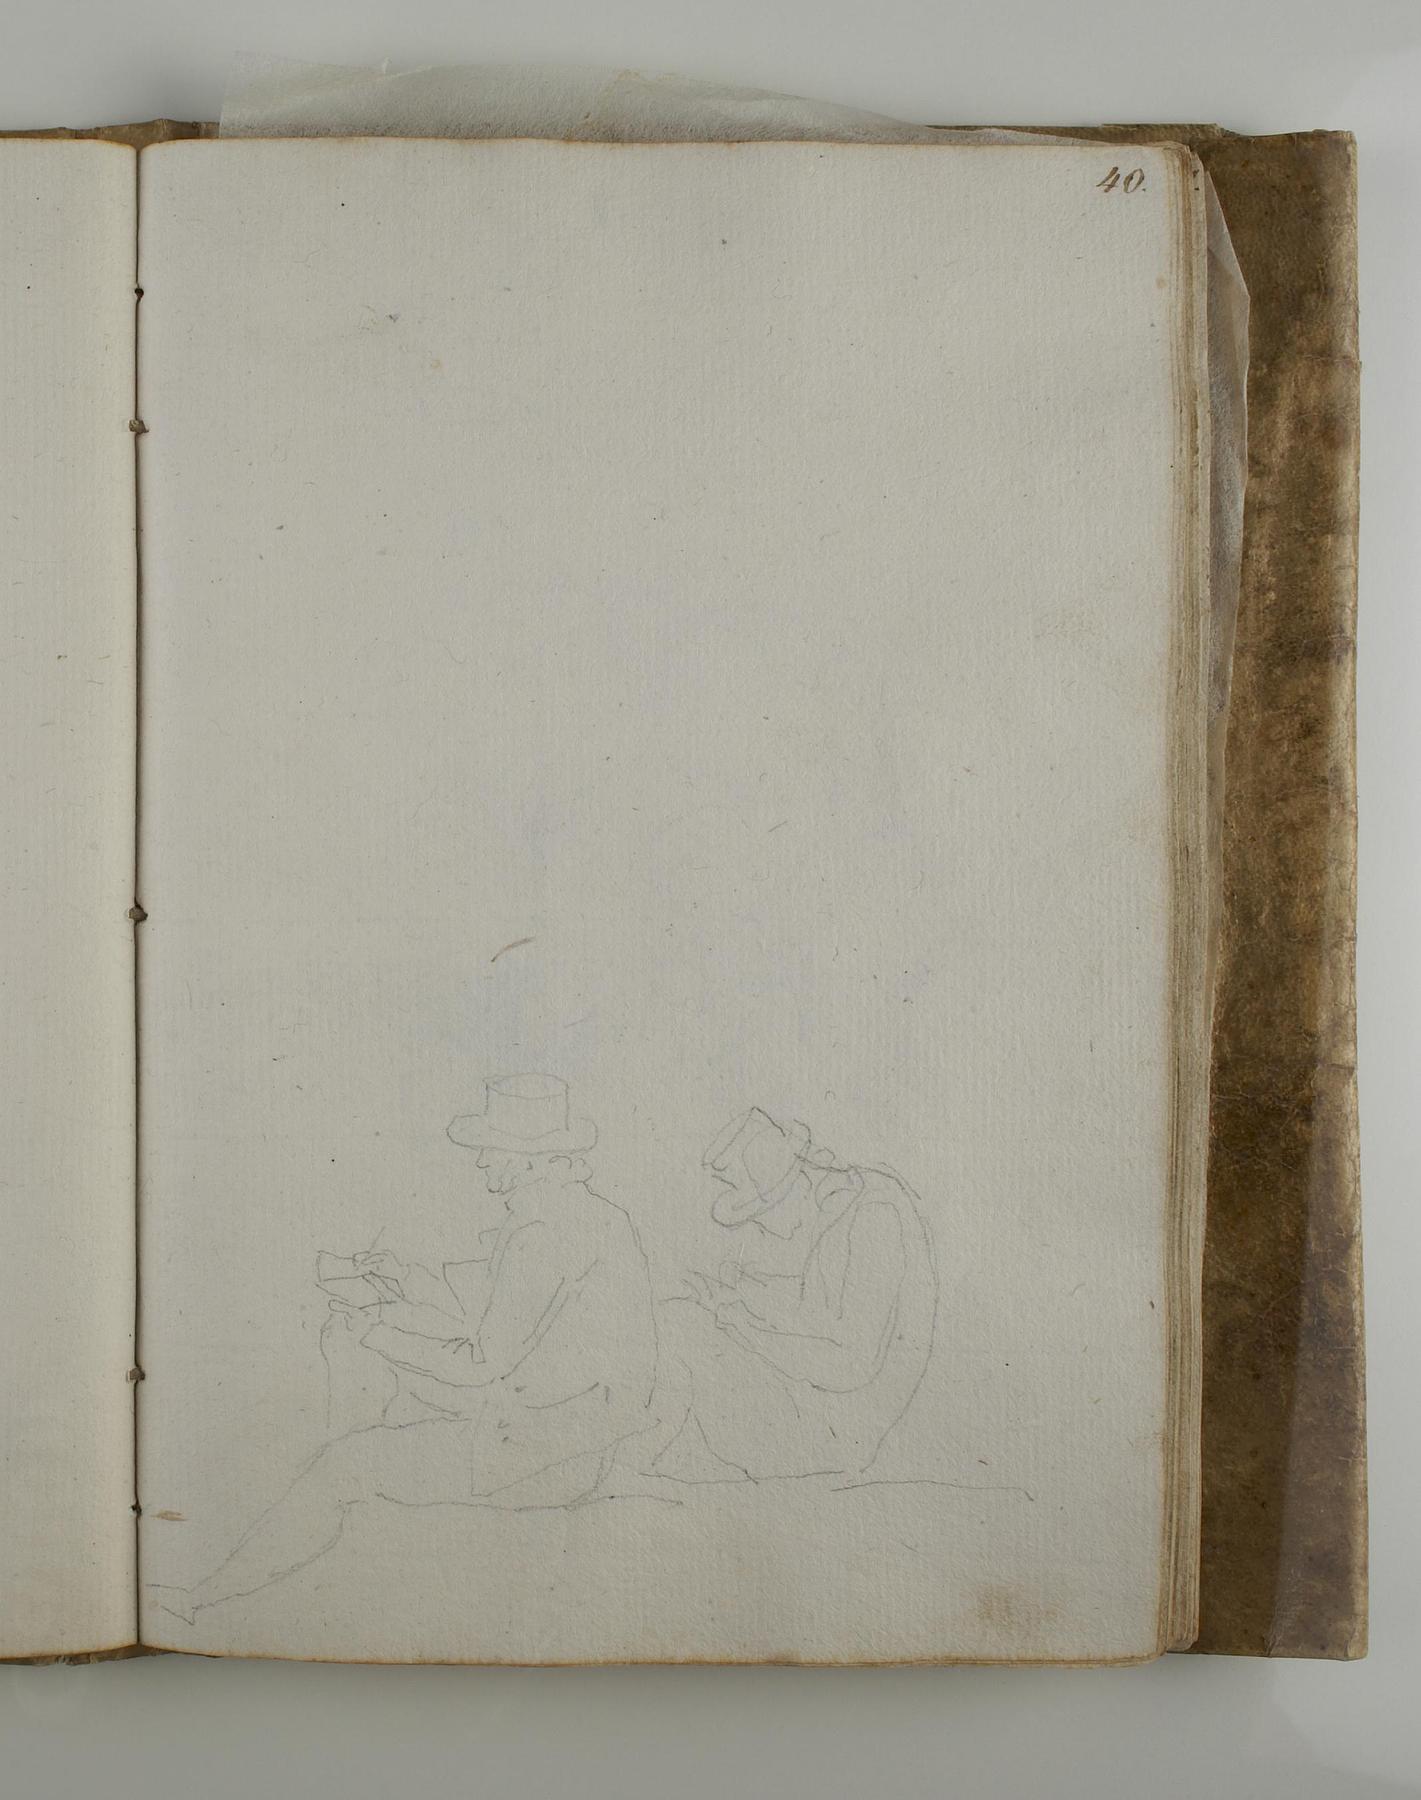 Seated artists drawing, C563,40r